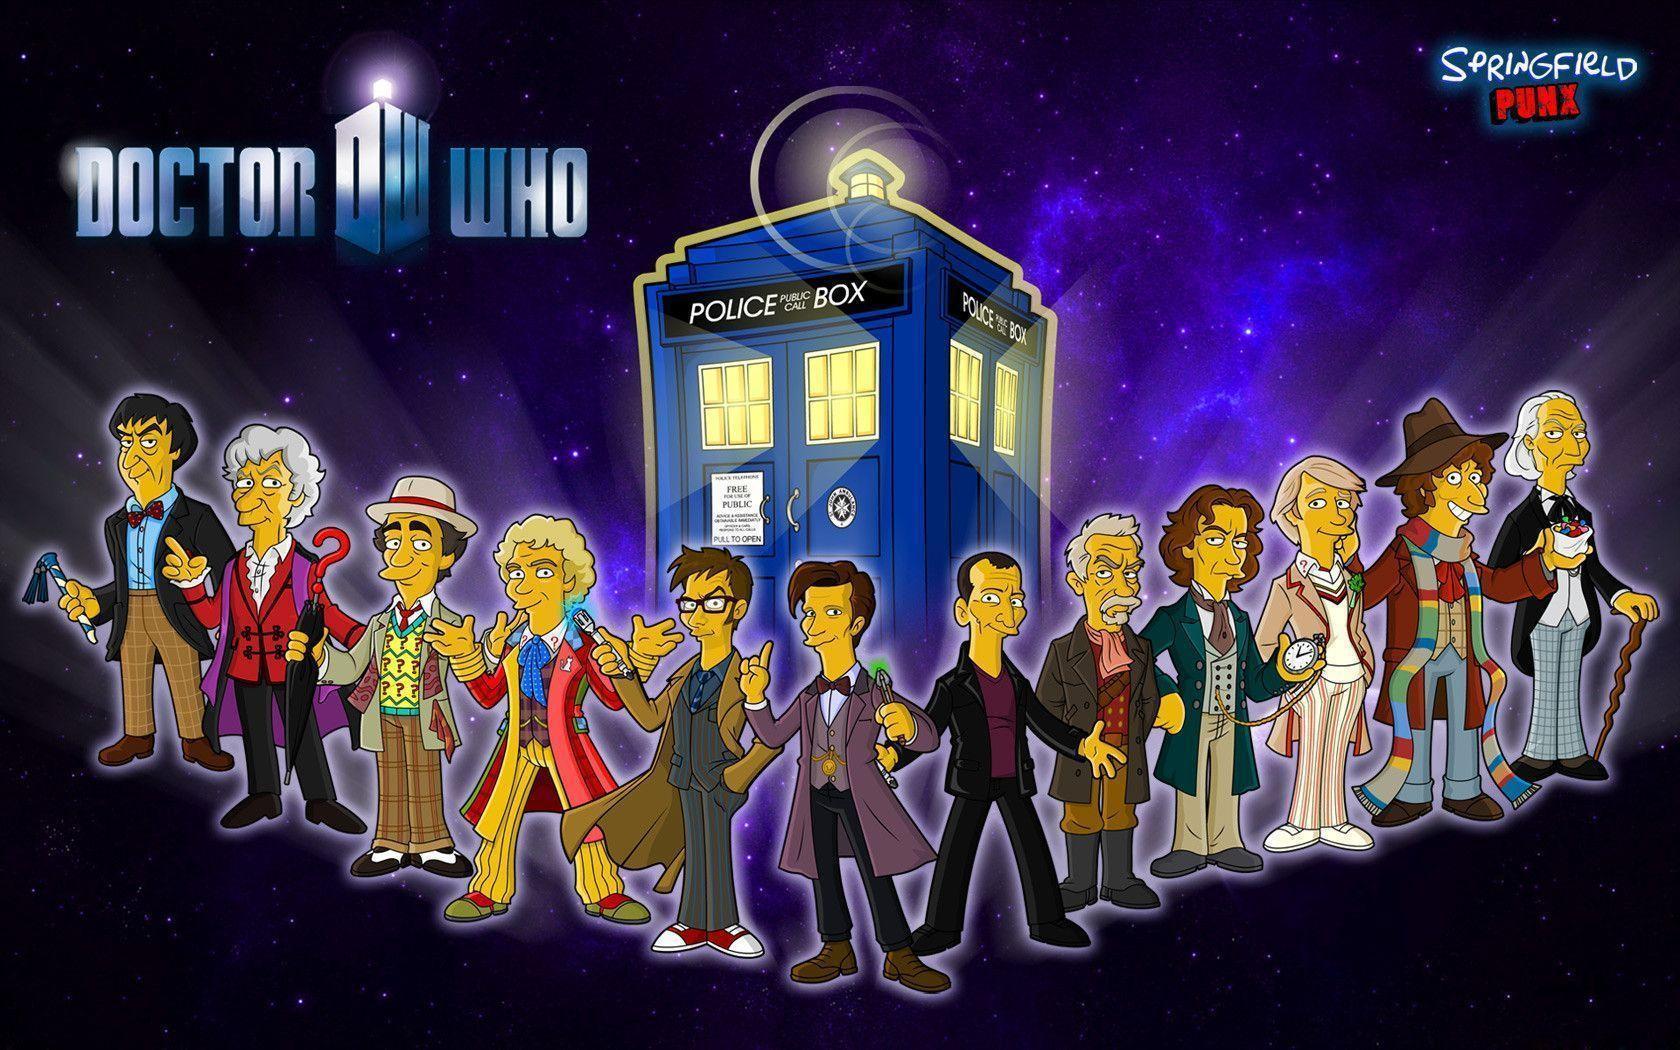 Springfield Punx: New Doctor Who Wallpaper!